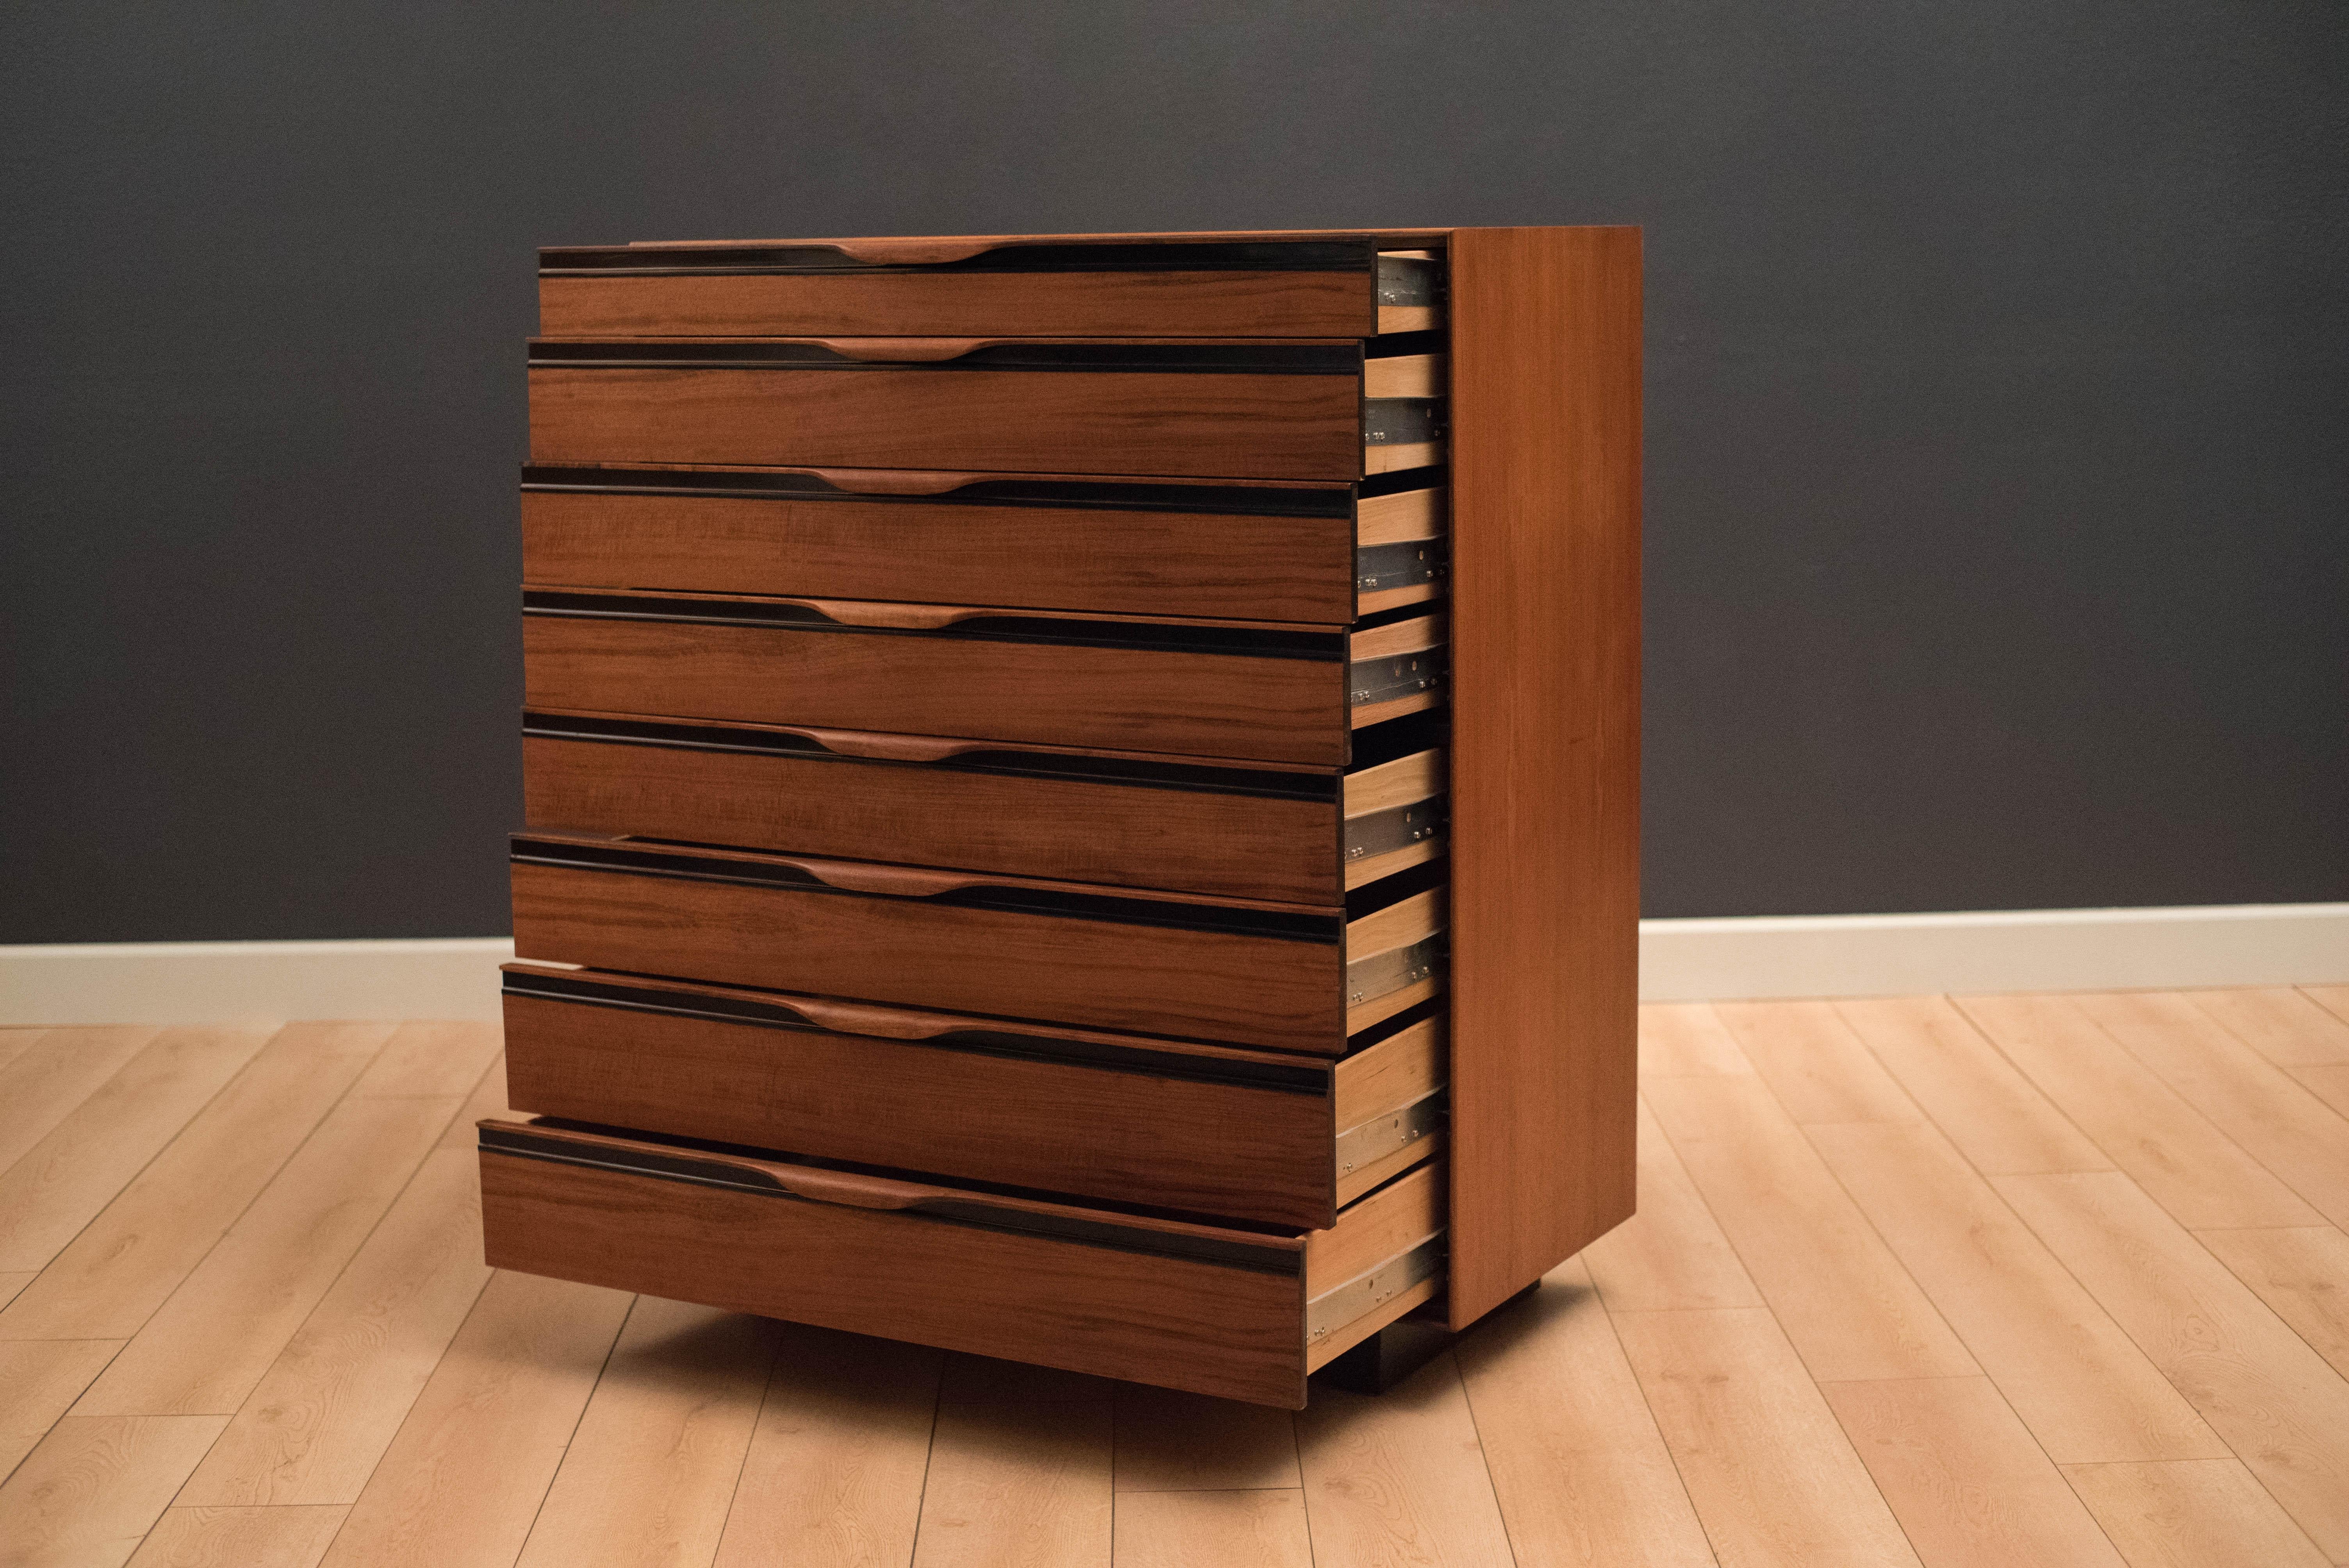 Mid-Century Modern highboy dresser chest designed by John Kapel for Glenn of California in walnut. This piece is equipped with eight storage drawers that glide smoothly on metal slides. Matching pair of nightstands available in separate listing.